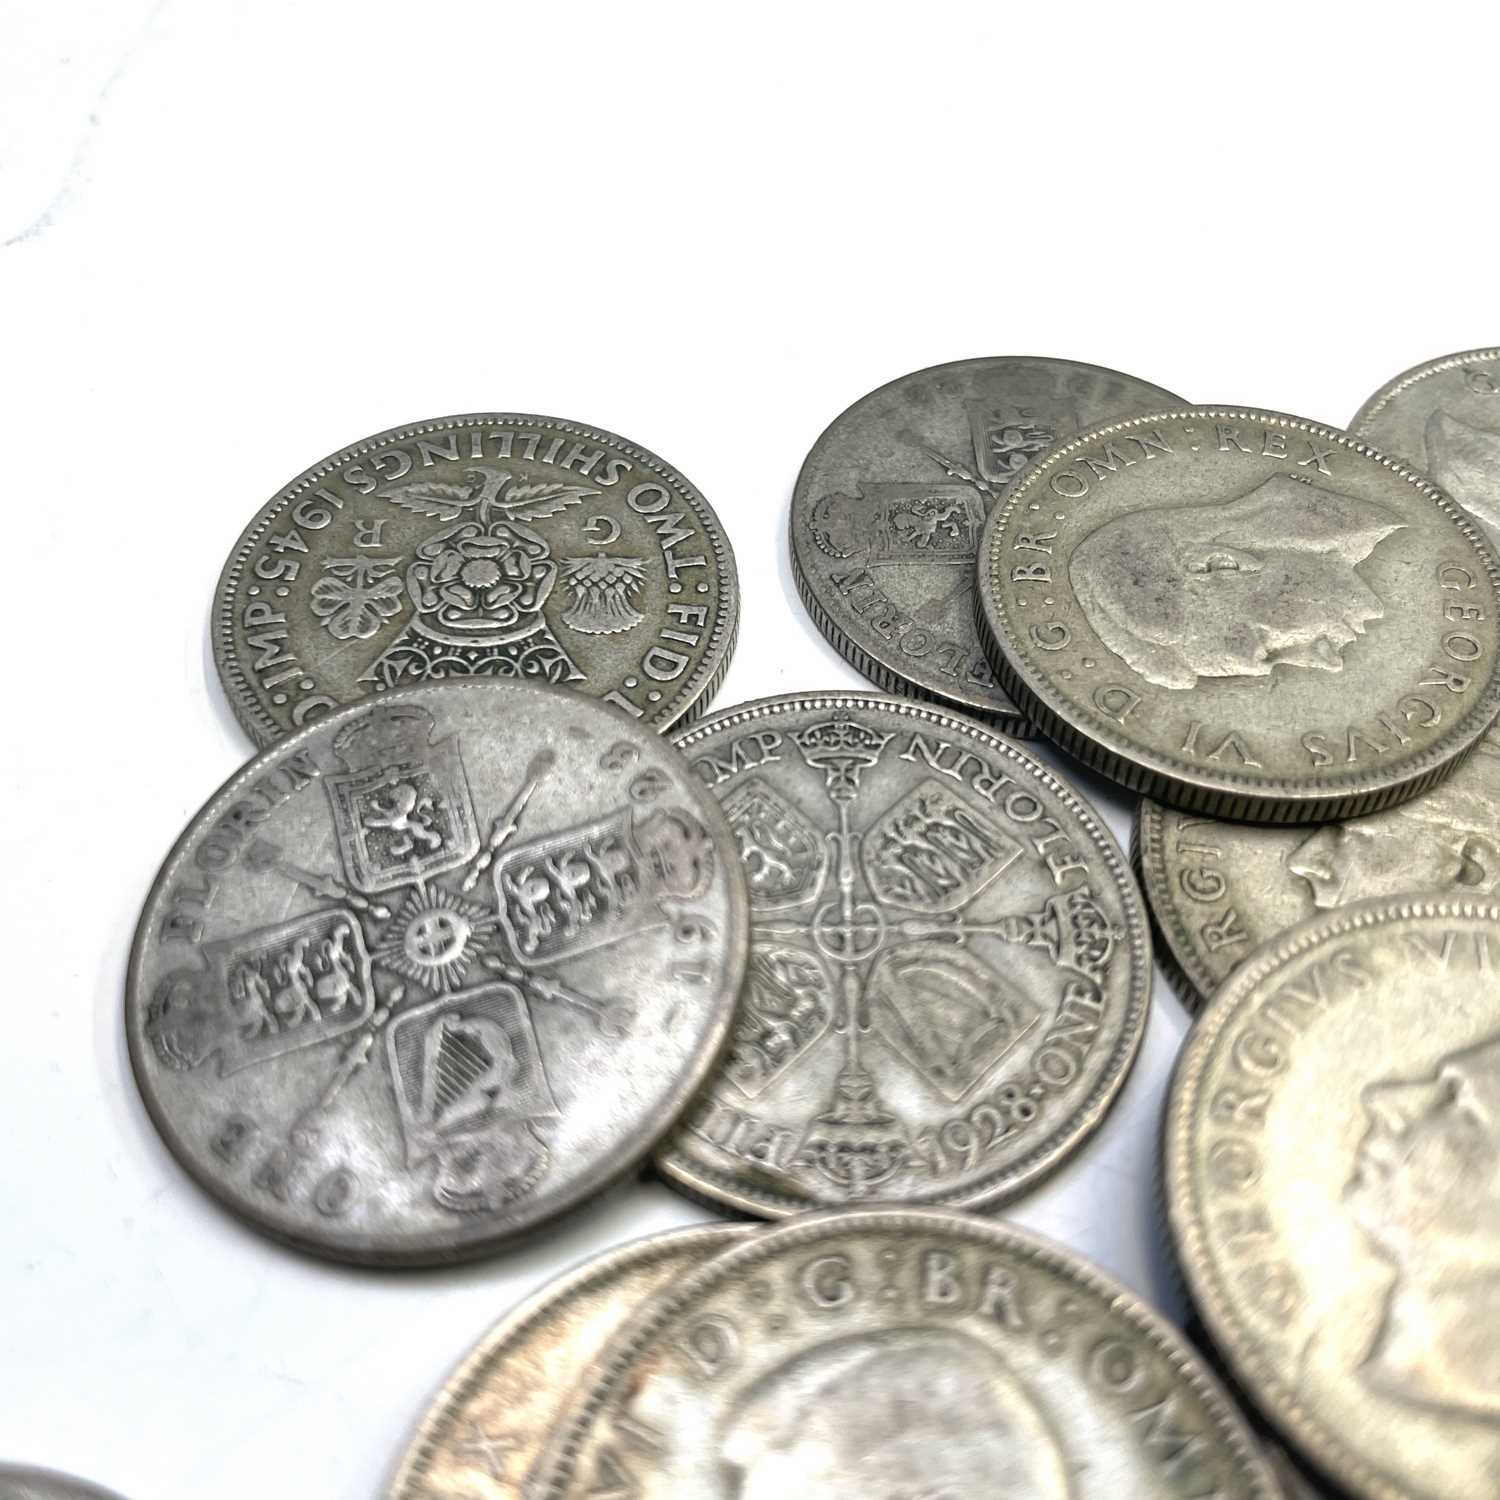 G.B. Pre 1947 Silver Coins. Comprising a bag containing £5 of pre 1947 G.B silver coinage. - Image 3 of 10